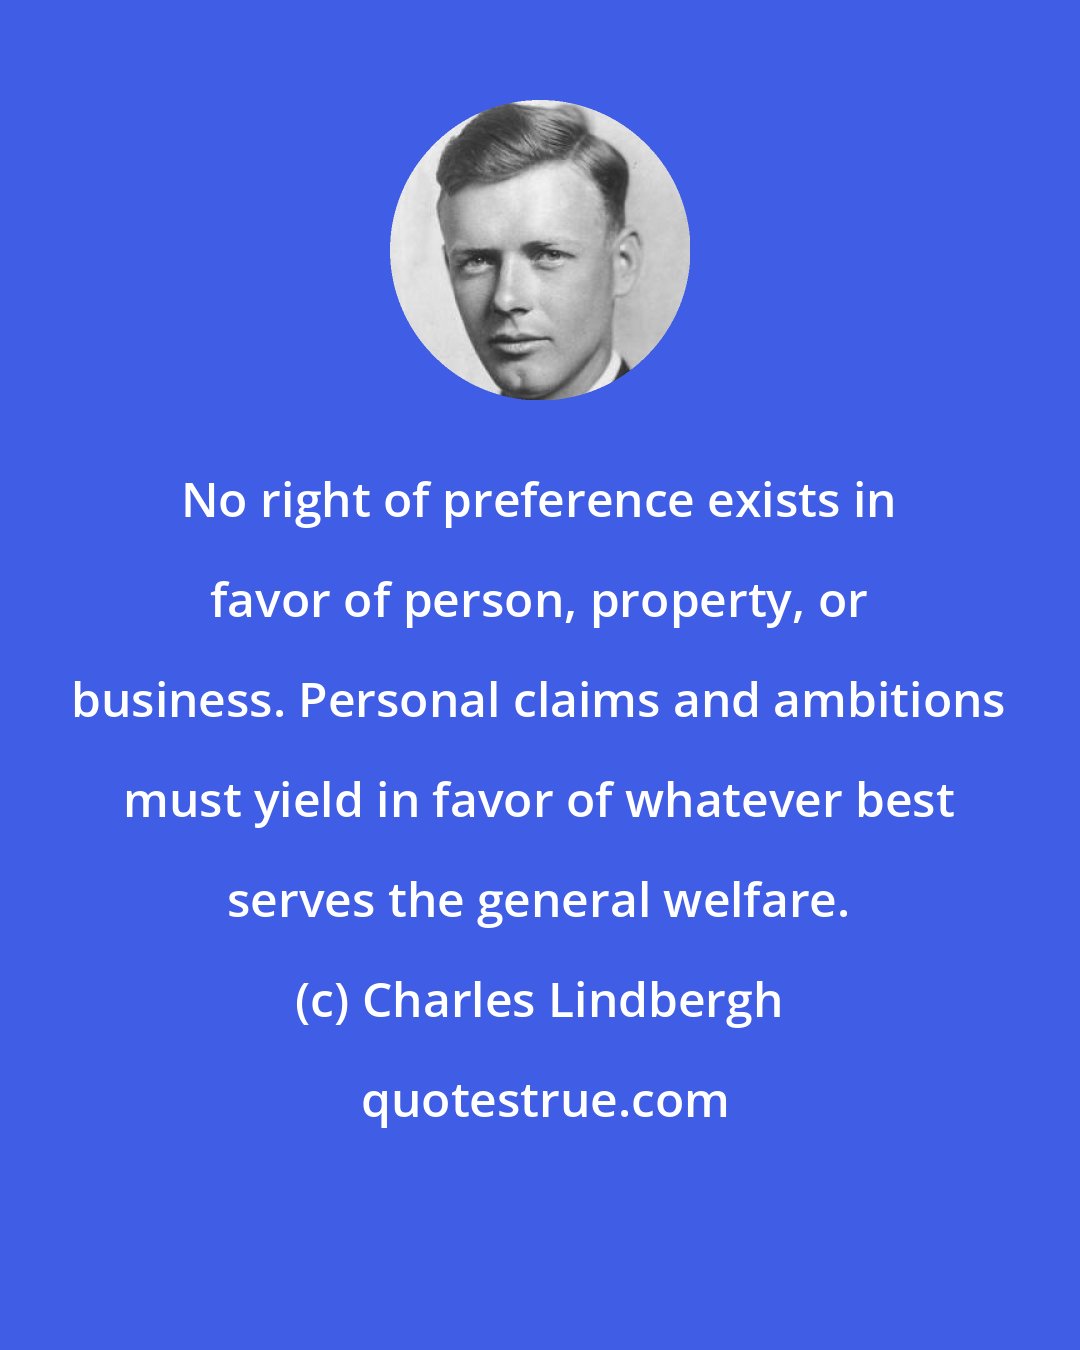 Charles Lindbergh: No right of preference exists in favor of person, property, or business. Personal claims and ambitions must yield in favor of whatever best serves the general welfare.